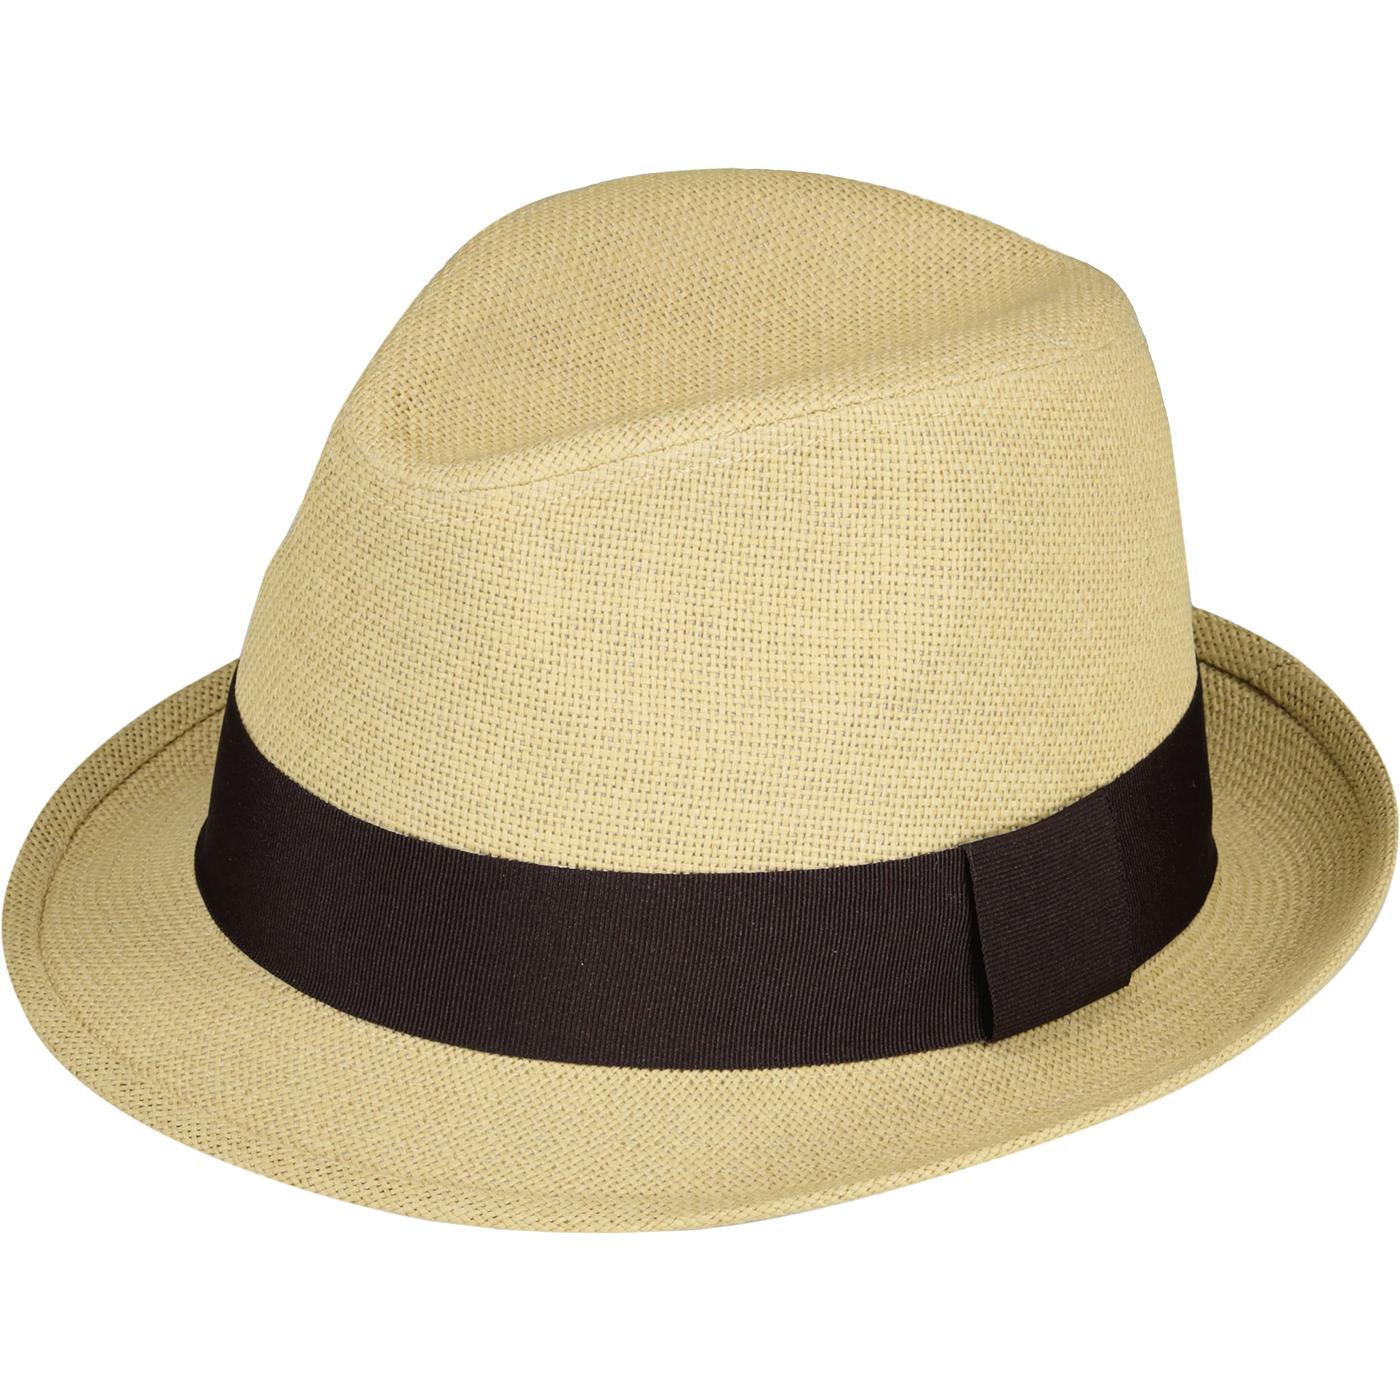 FAILSWORTH Retro 70s Paperstraw Trilby Hat